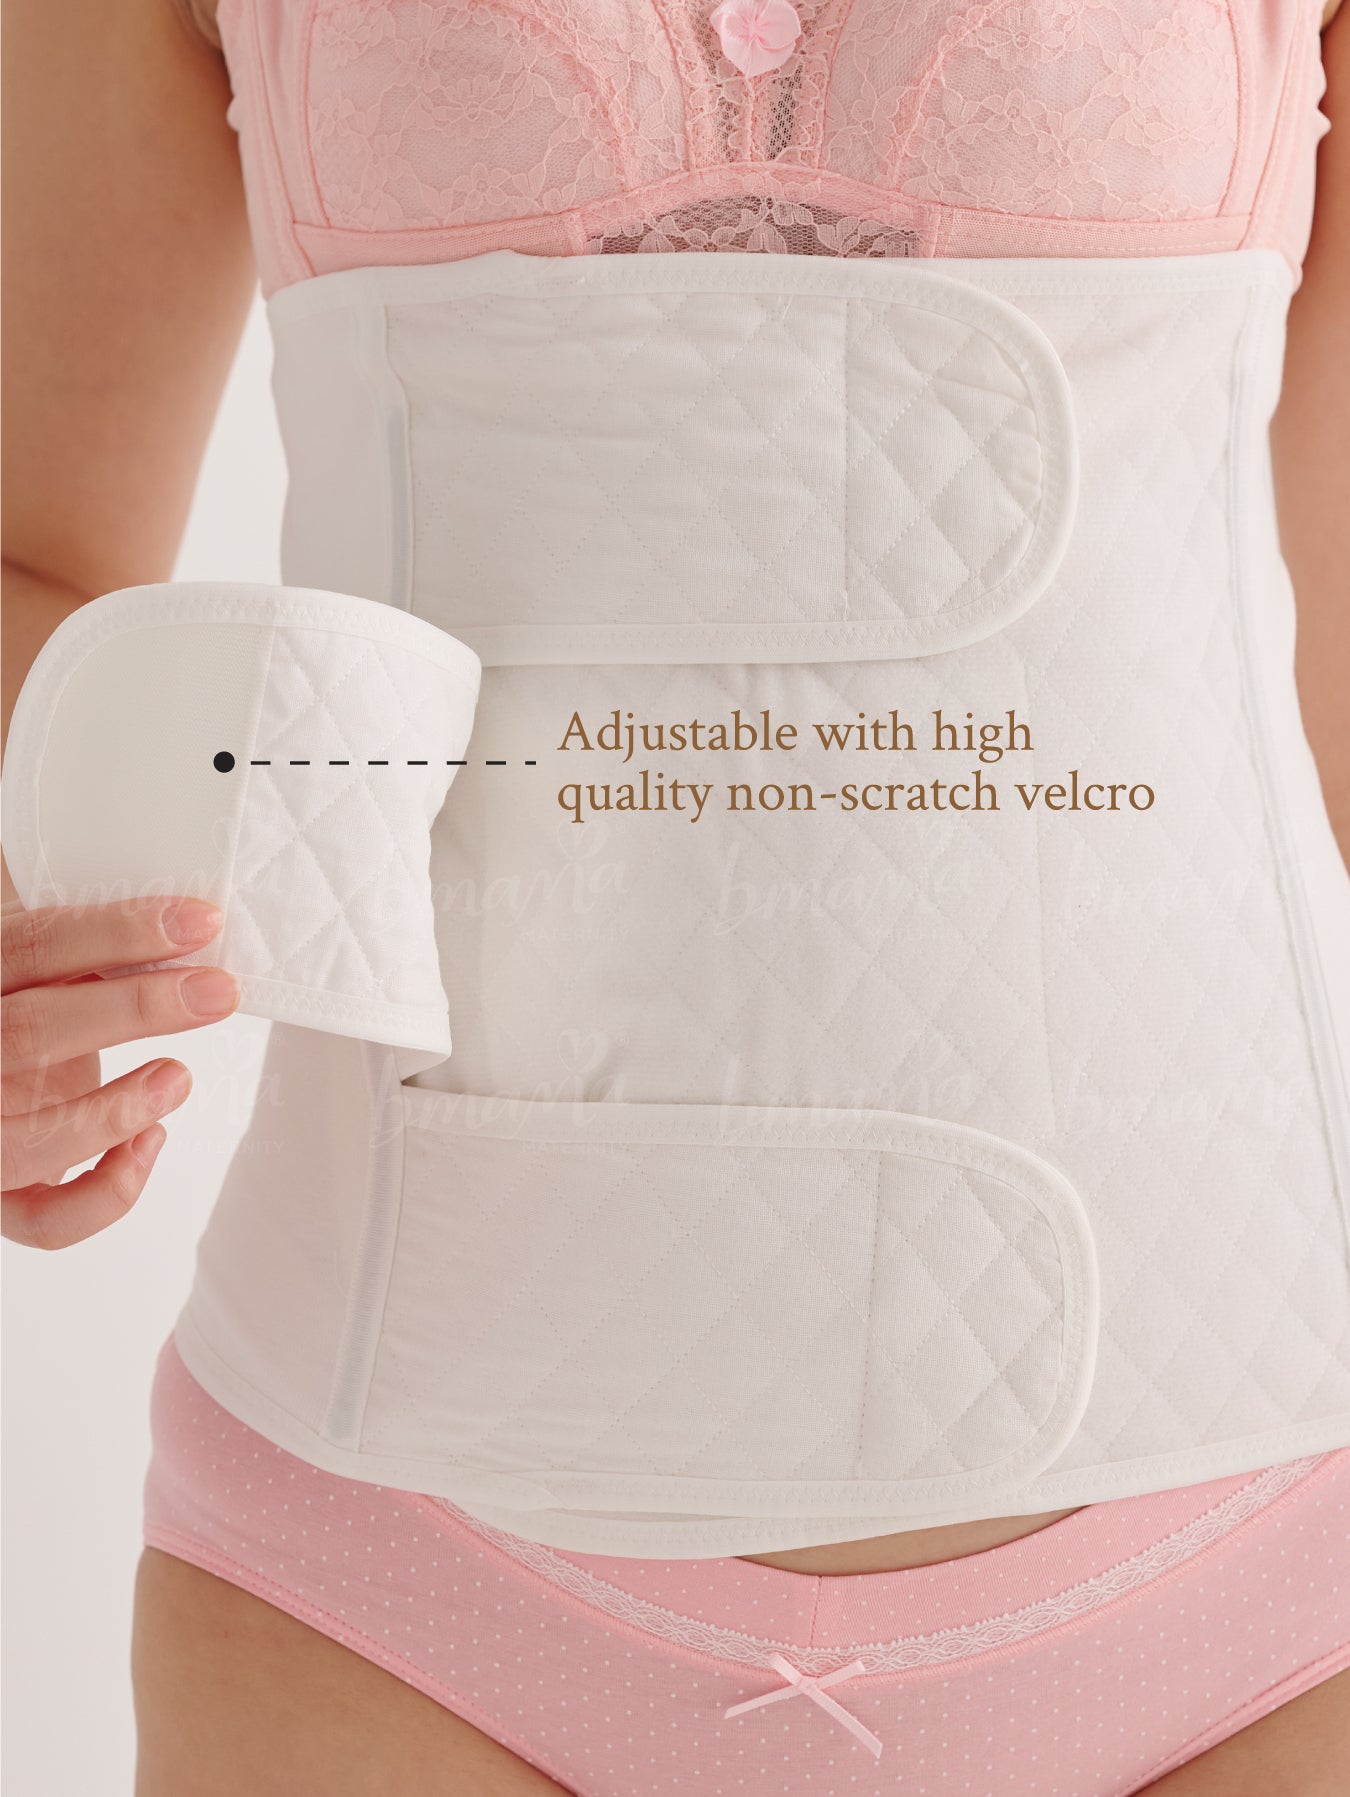 1) Bmama 3-Strap Belly Binder 100% Cotton (XL) For All Skin  Types.Breathable, Improve blood circulation, reduces swell